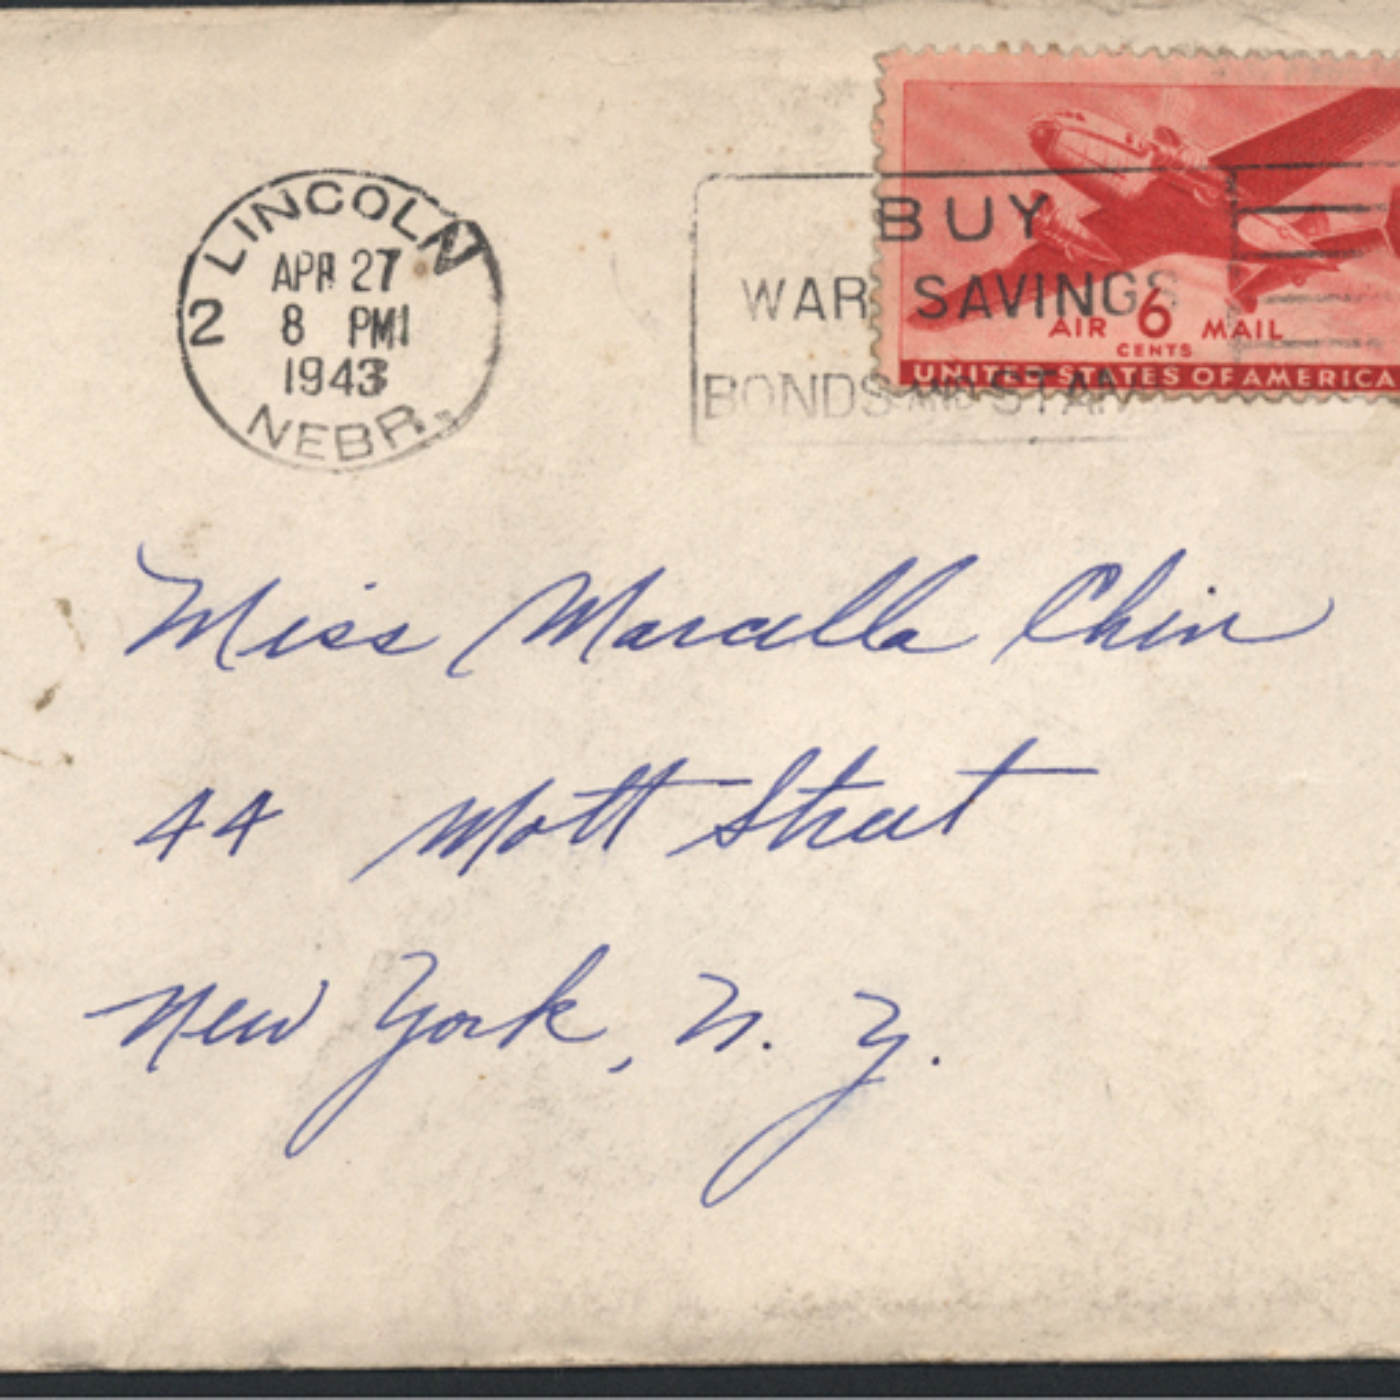 Letter that Walter B. Chin wrote to his sister Marcella Chin in English on April 27, 1943 while he was completing Air Force training at Lincoln Air Base in Nebraska. Courtesy of Marcella Dear, Museum of Chinese in America (MOCA) Collection.